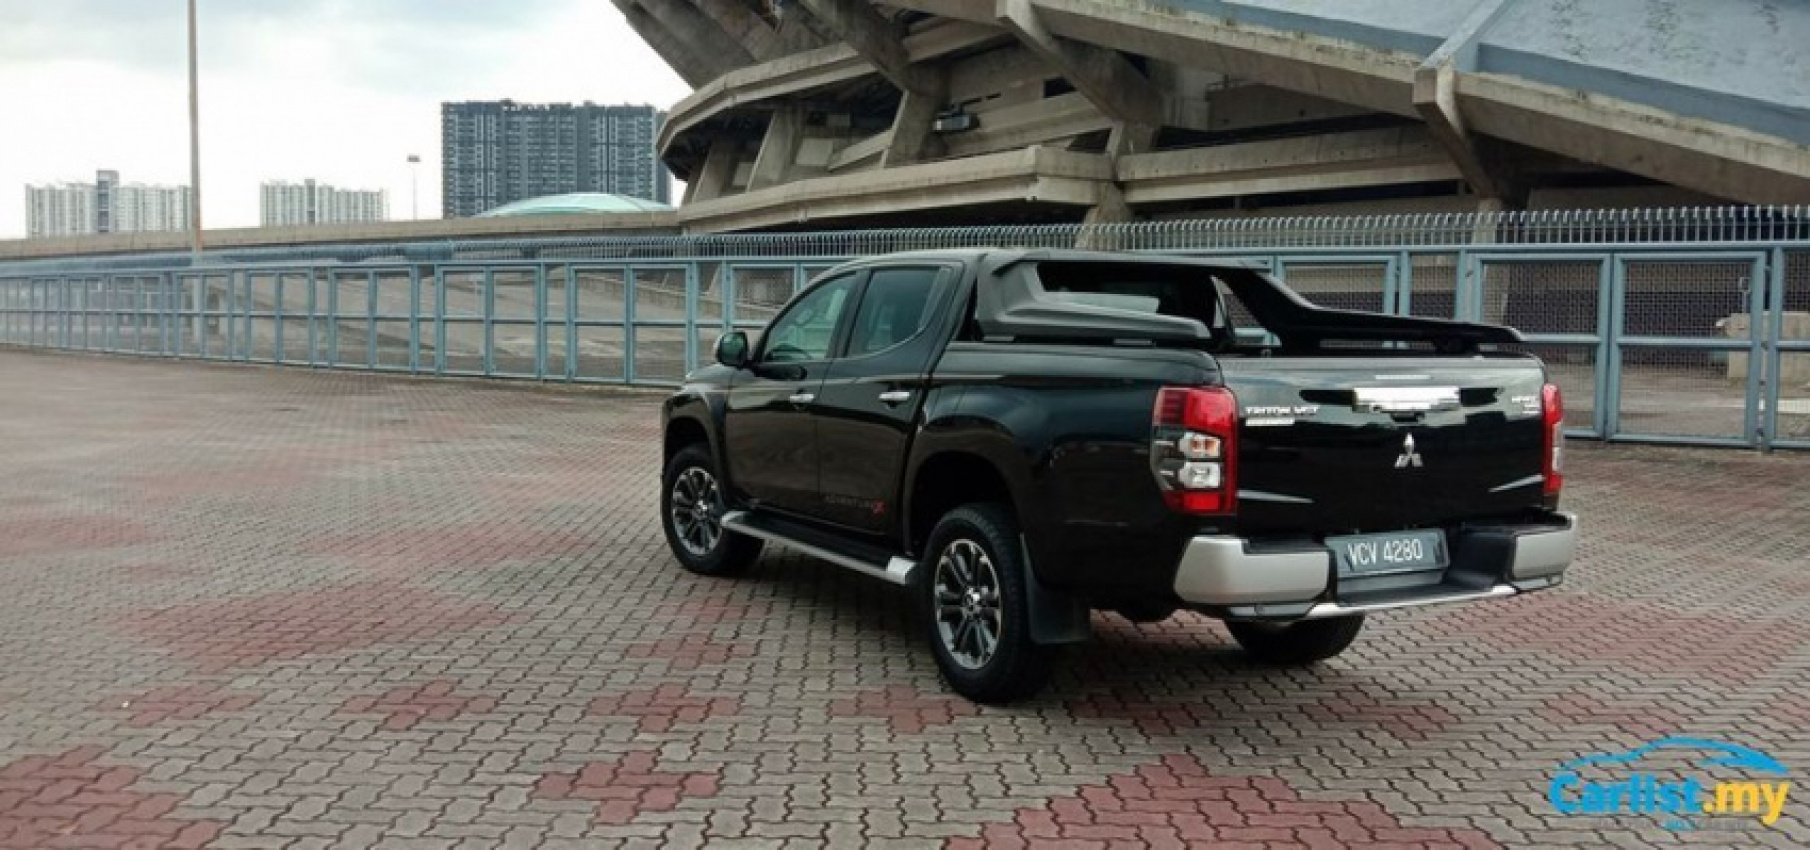 autos, cars, mitsubishi, reviews, 2020 triton, 4n15, mitsubishi triton, mk3 triton, triton, triton malaysia, we may never have another mitsubishi evo – but we do have the triton adventure x